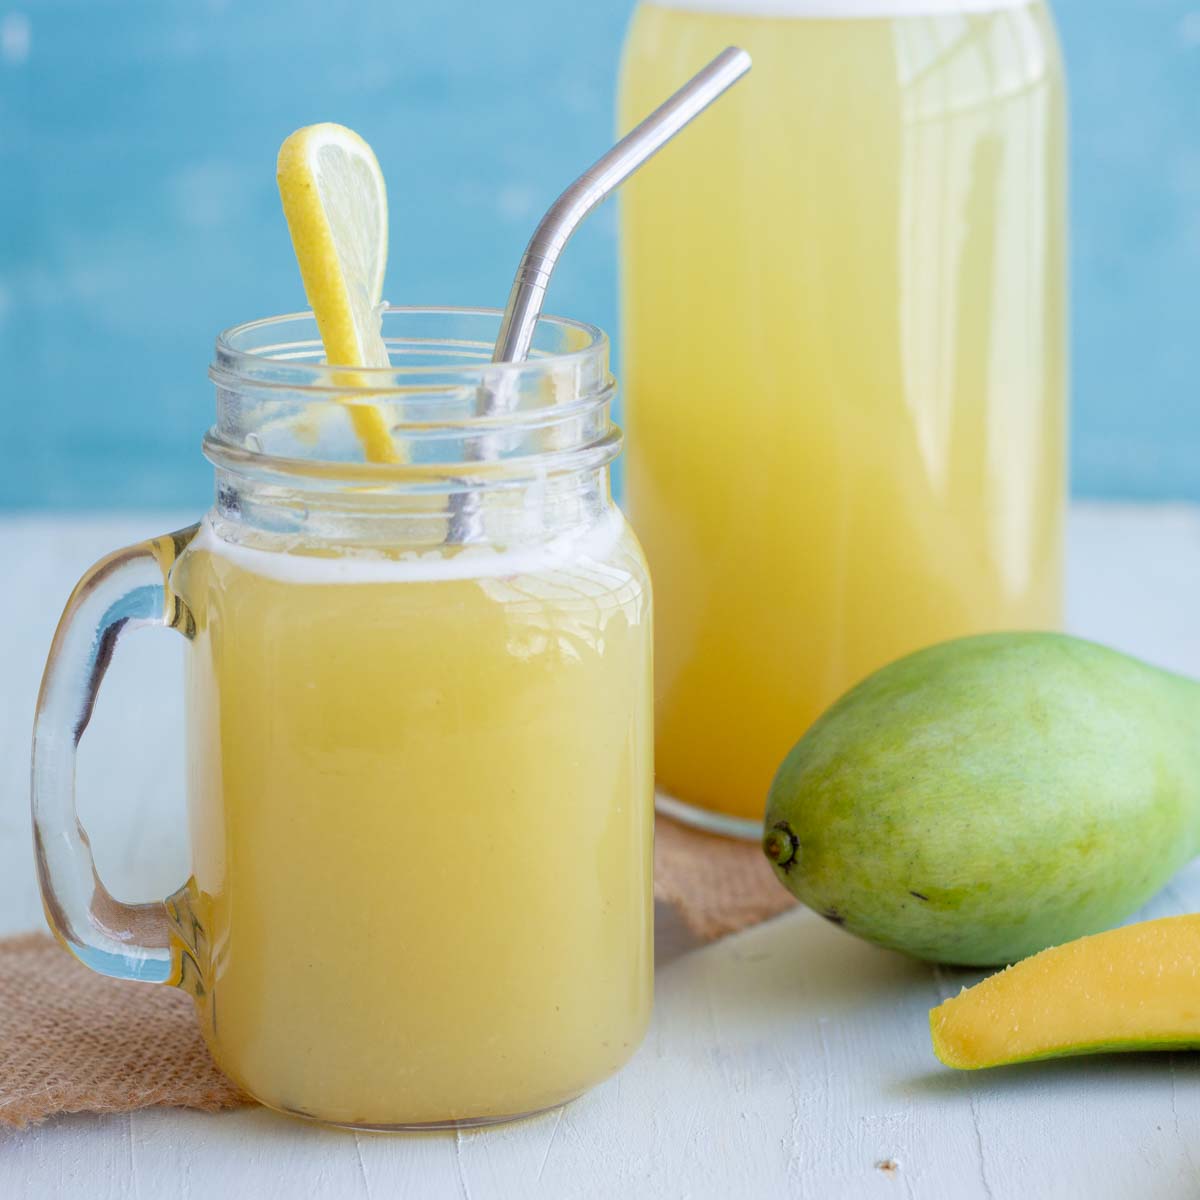 A mason jar with aam panna or green mango drink with a slice of lemon, and a stainless steel straw in it. Behind the mason jar is a bottle filled with aam panna, and a raw green mango.